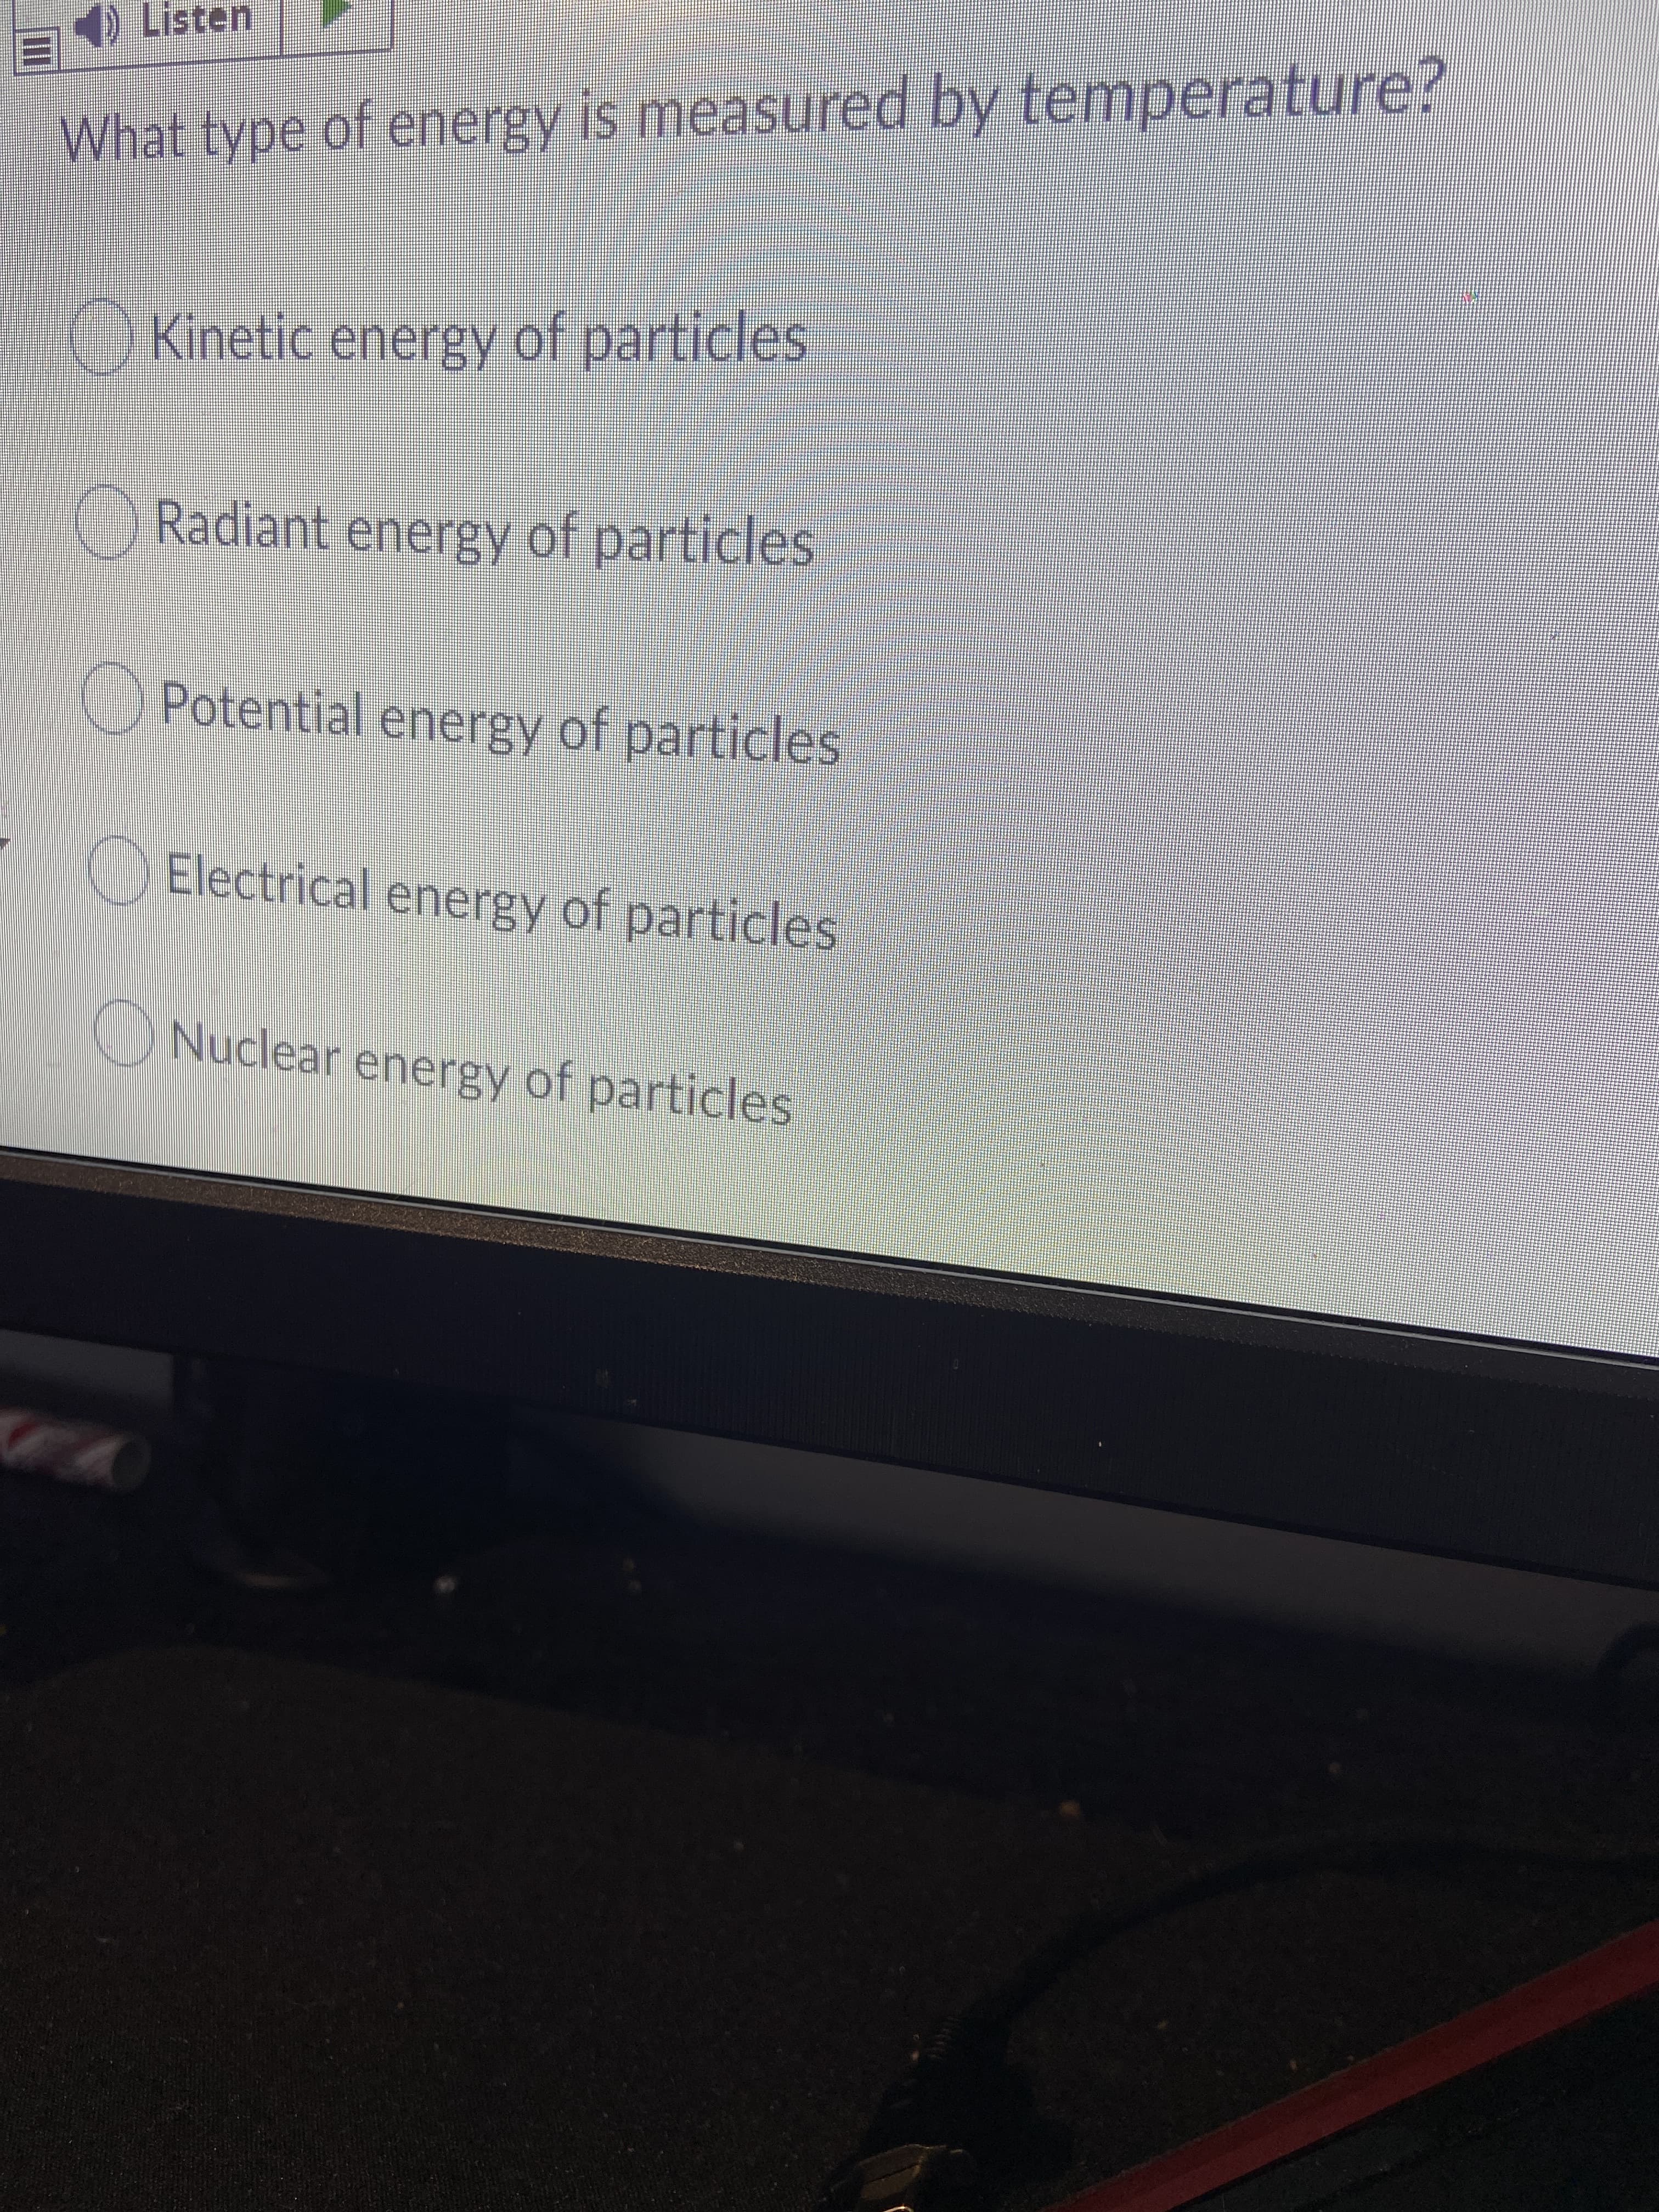 What type of energy is measured by temperature?
)Kinetic energy of particles
Radiant energy of particles
Potential energy of particles
Electrical energy of particles
ONuclear energy of particles
